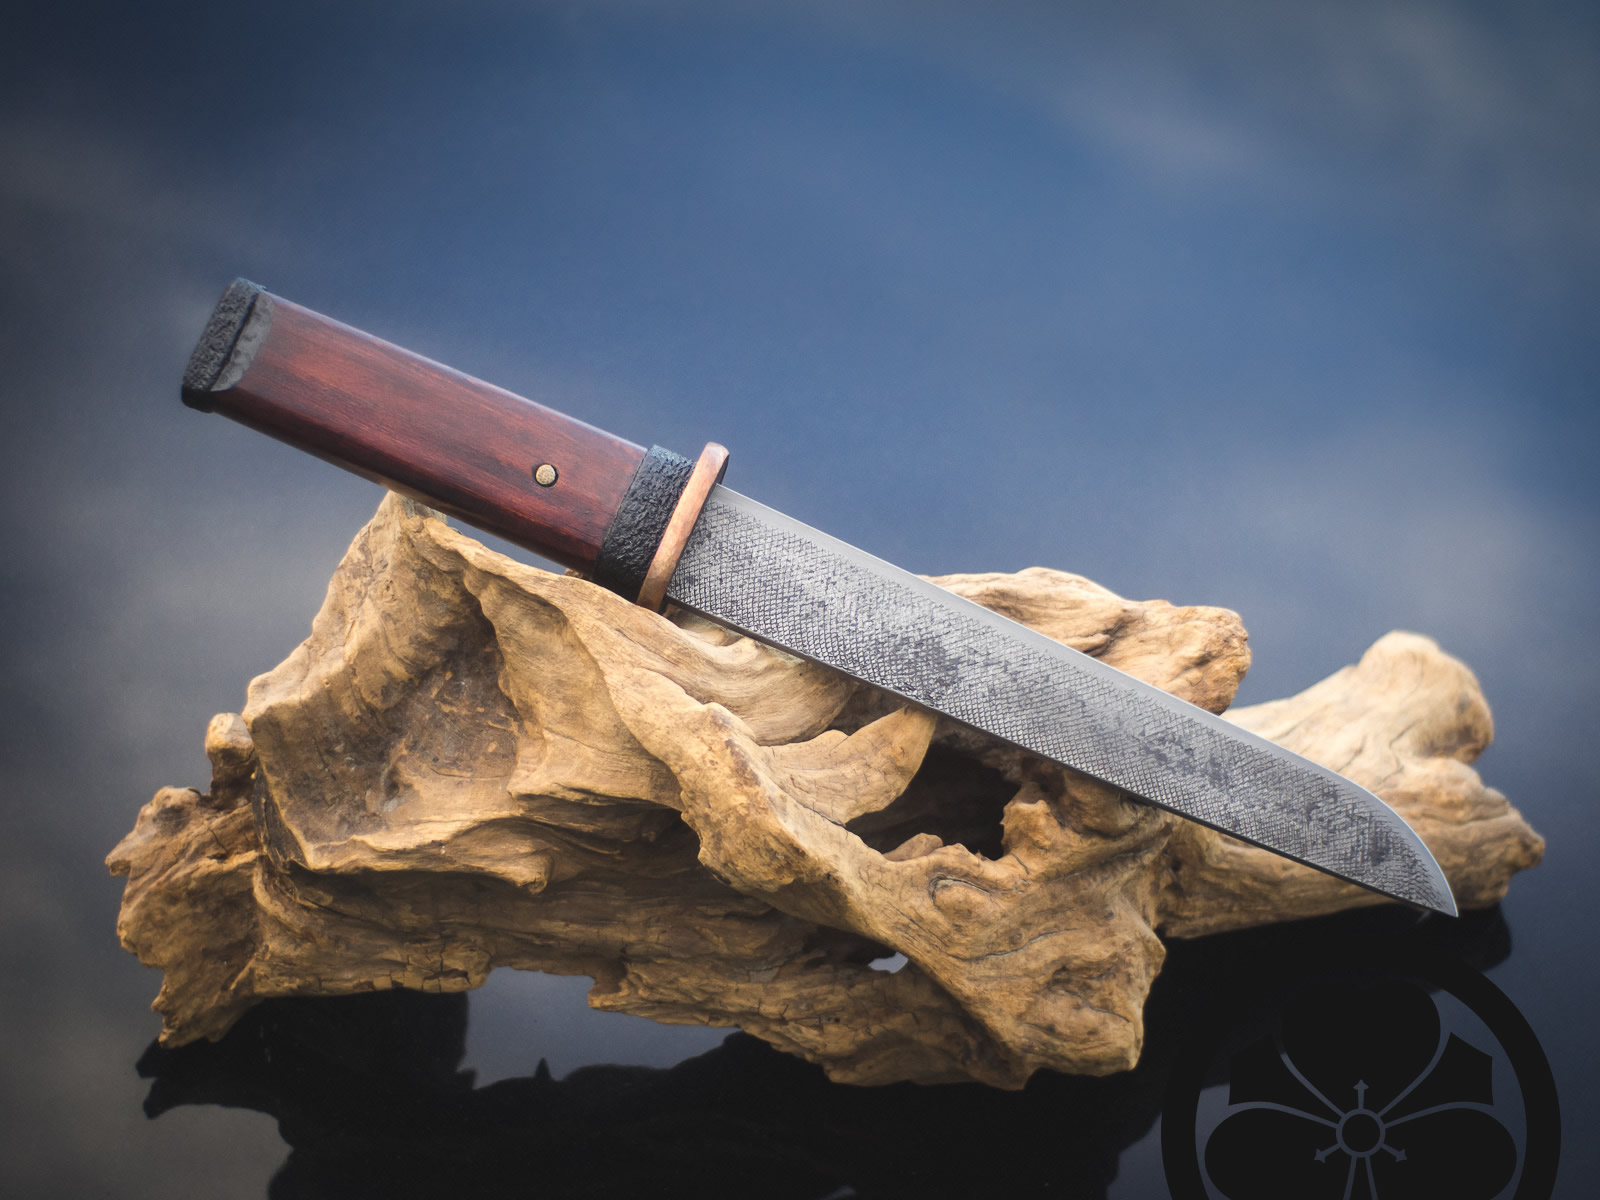 Island Blacksmith: Charcoal forged tanto reclaimed from files.